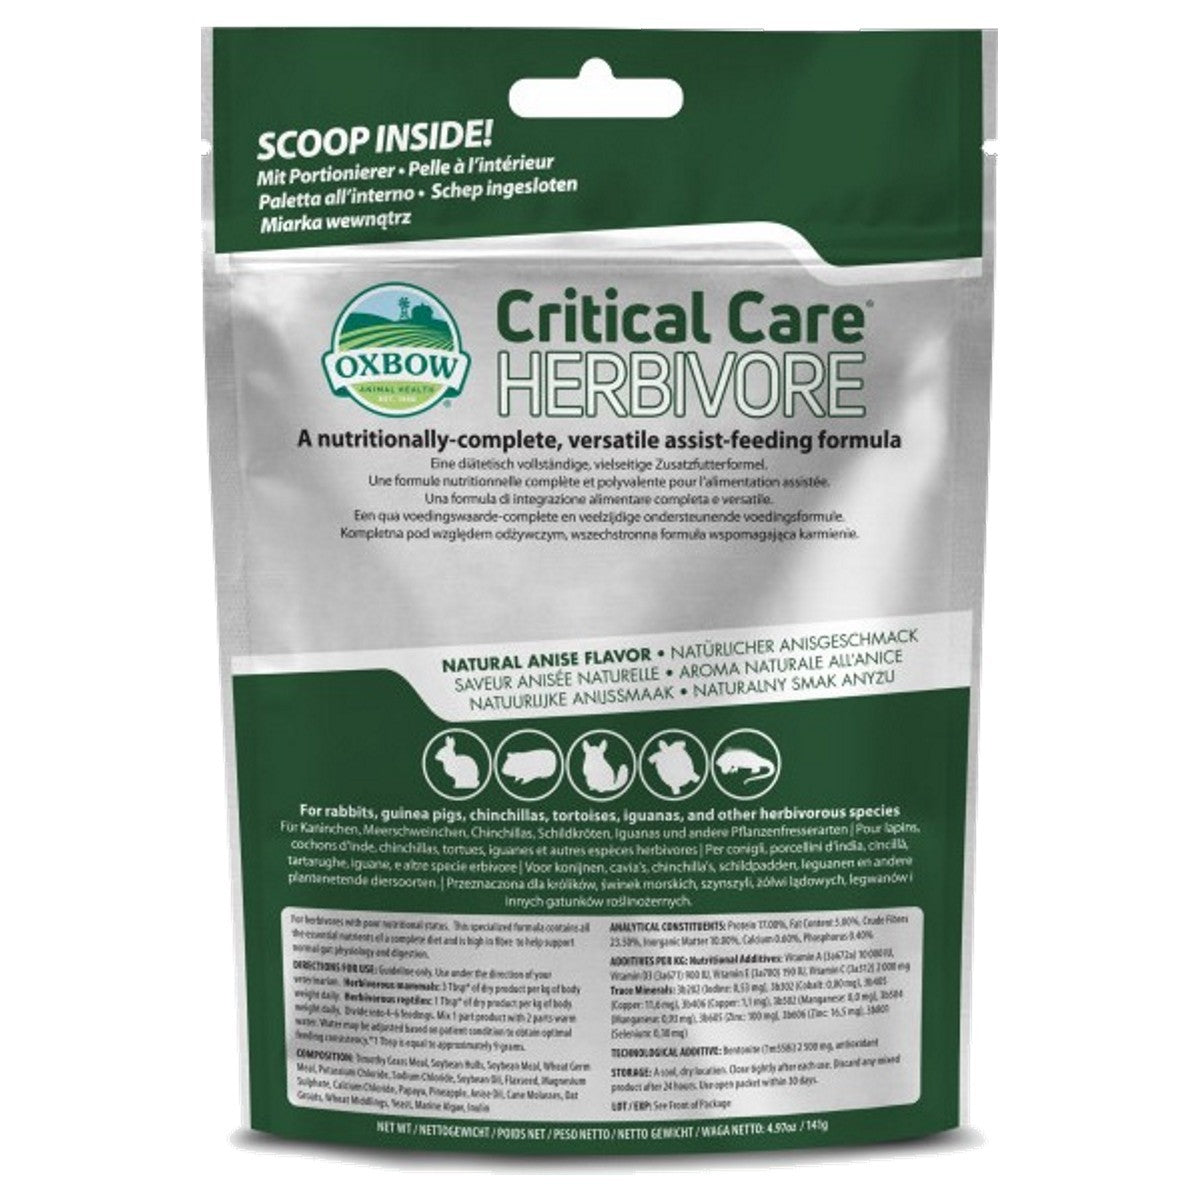 Oxbow Critical Care for herbivores 141g